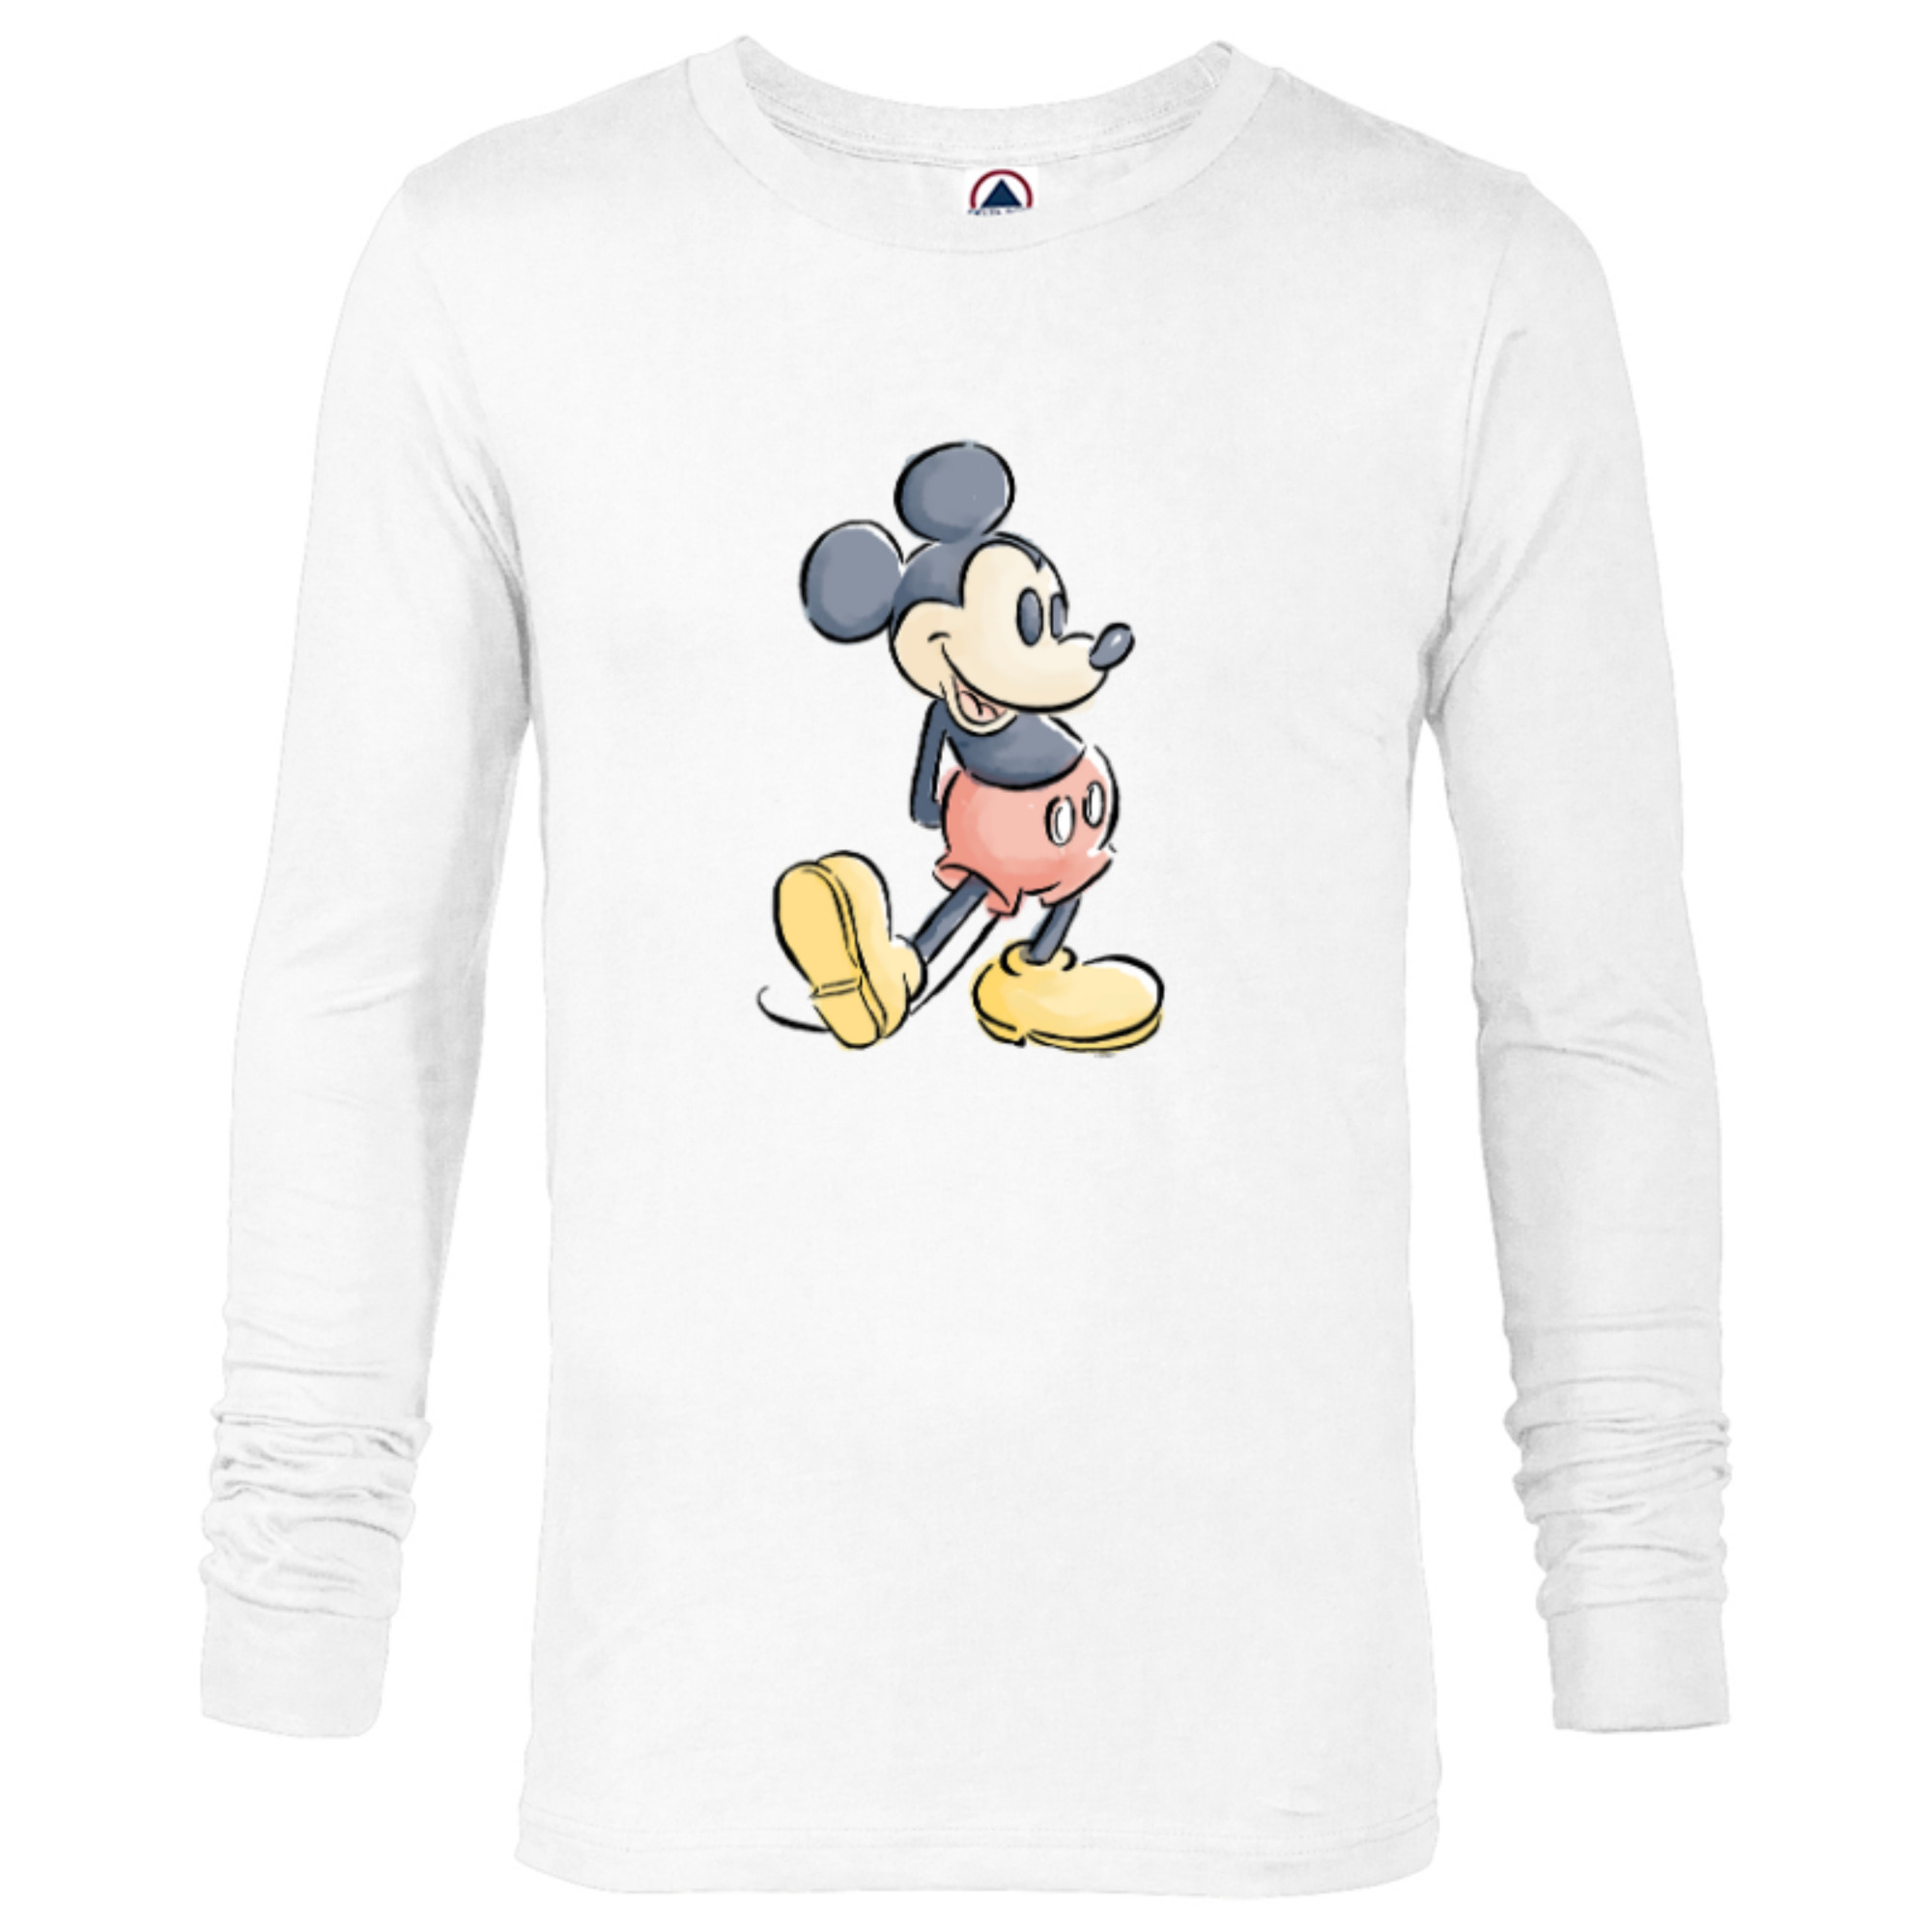 Disney Mickey Mouse Minnie Mouse Classic Pose T-shirt, Disne - Inspire  Uplift